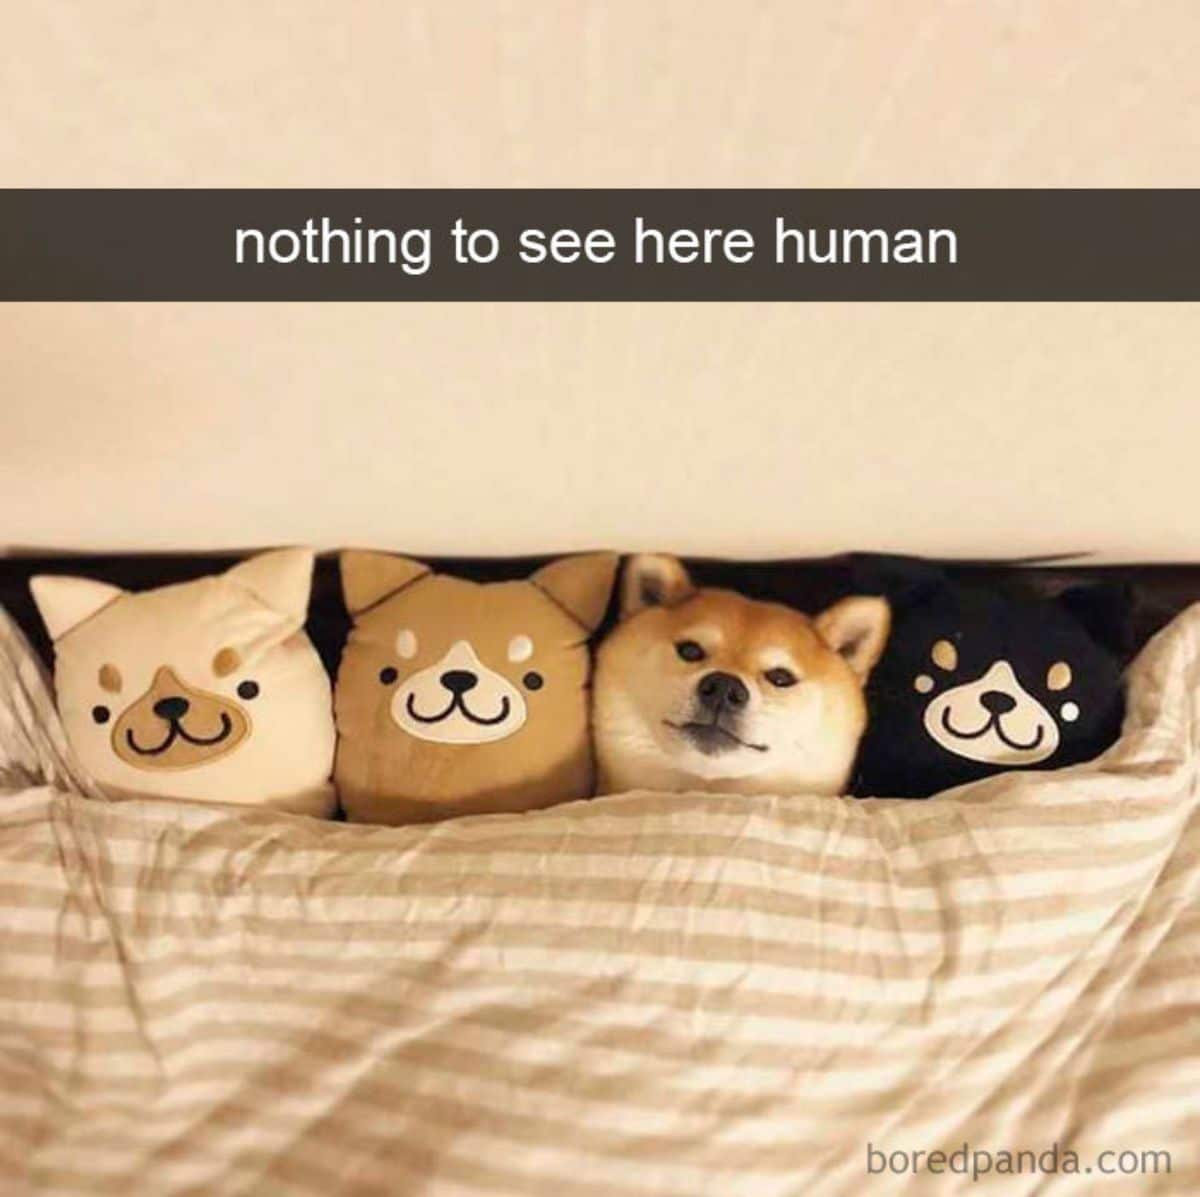 brown and white shiba inu laying under a brown and white blanket between white, brown and black shiba inu stuffed toys with a caption saying nothing to see here human